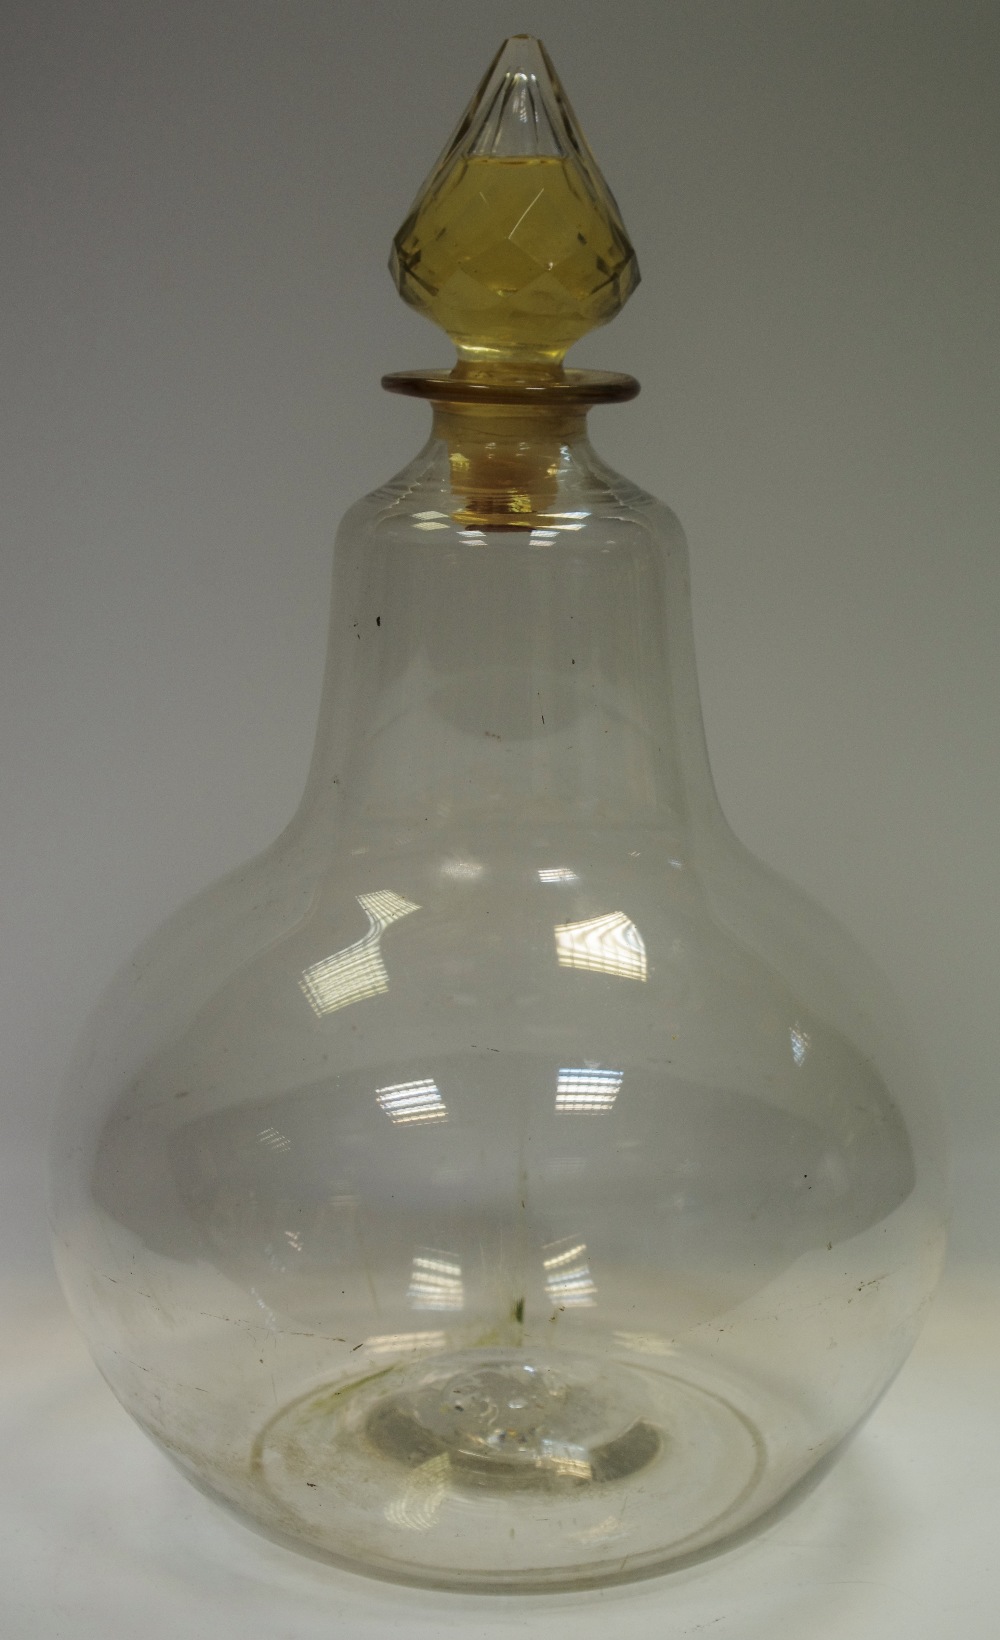 A 19th century blown glass gourd shaped apothecary jar with unusual liquid filled stopper